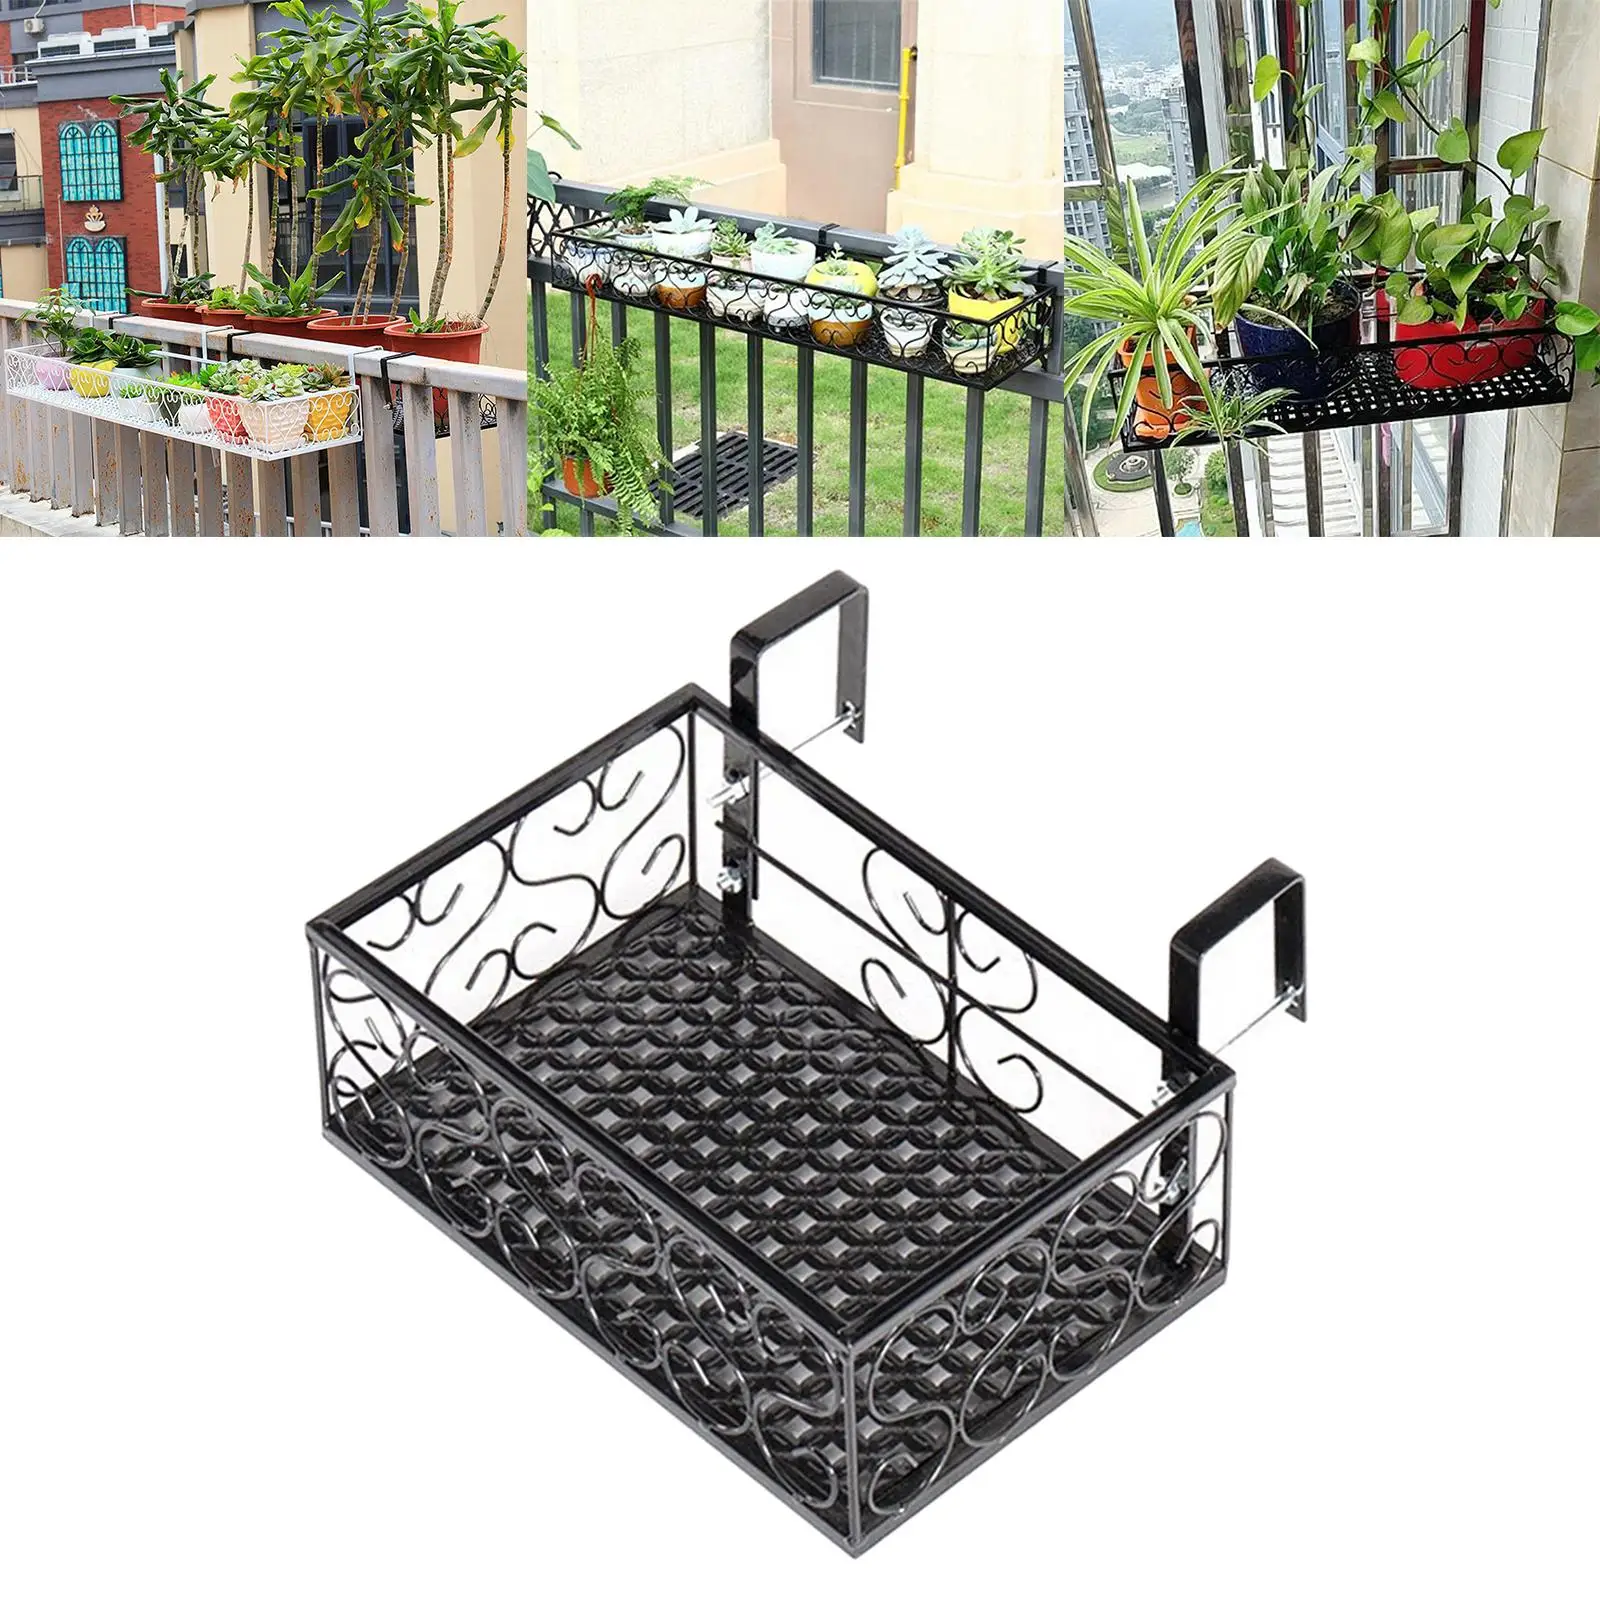 Wrought Iron Metal Planter Holder er Balcony Flowerpot ing Racks Stand Basket for Indoor and Outdoor Porches Patio Decor